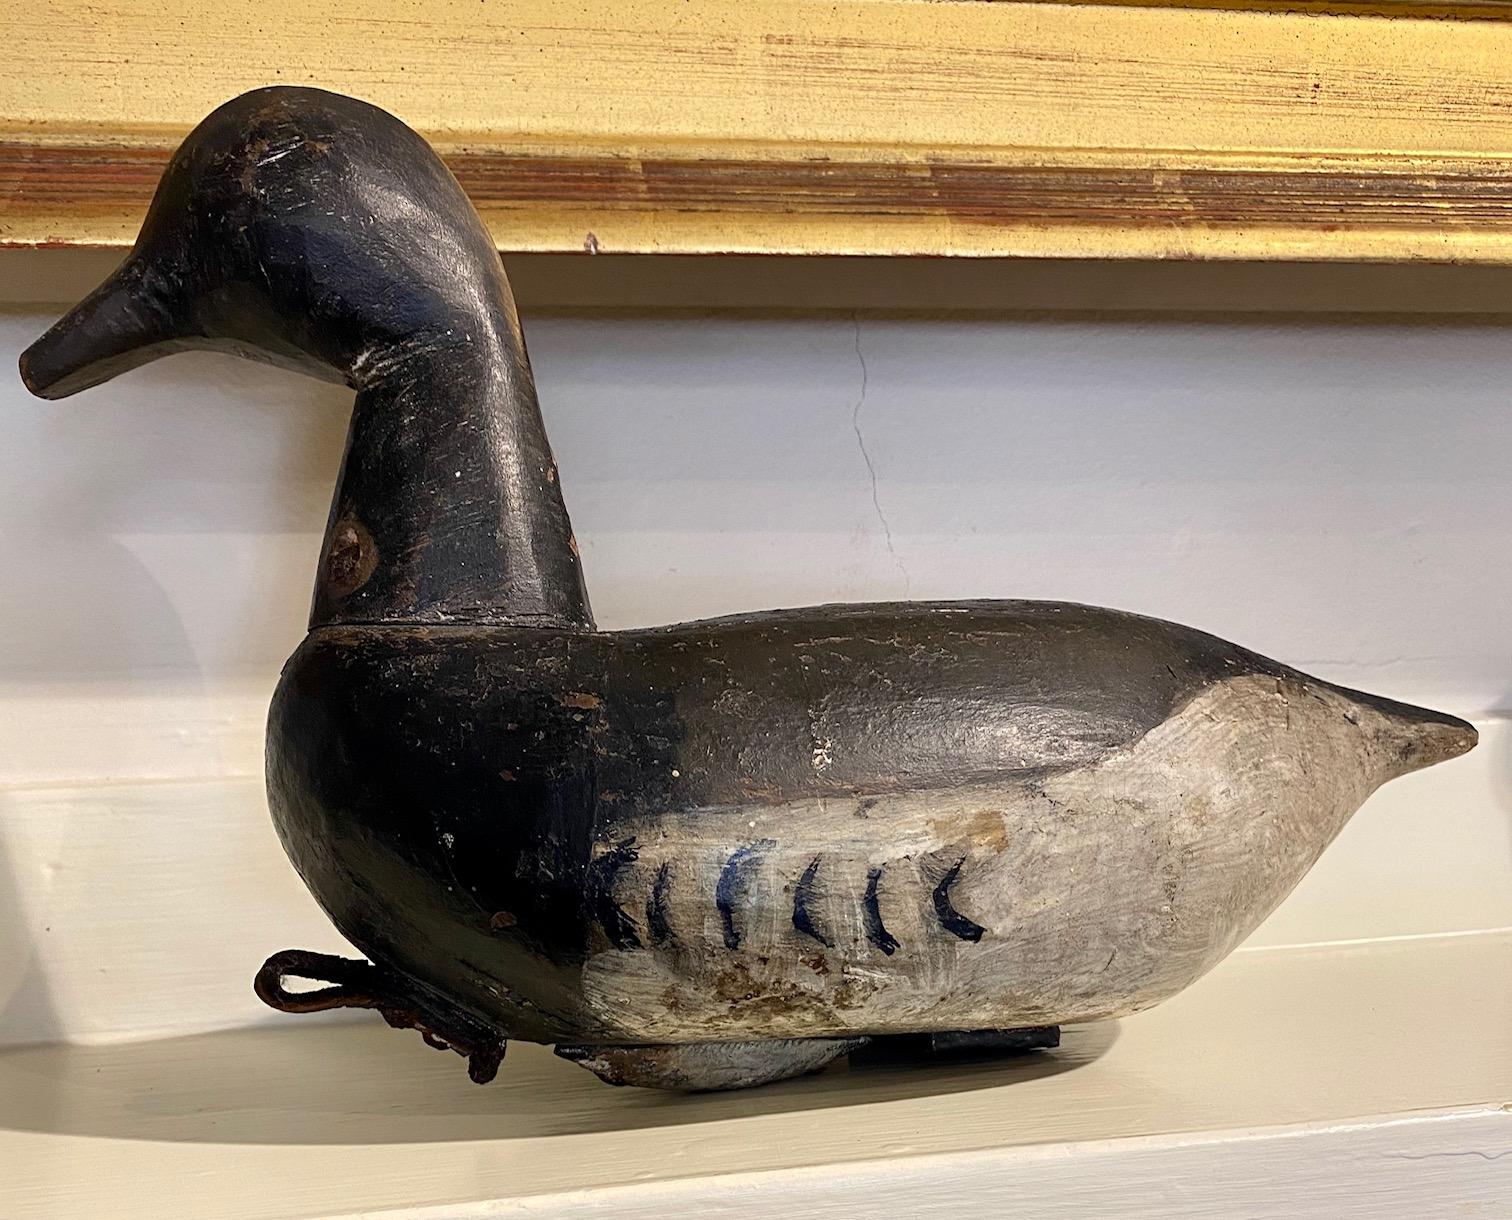 Antique long Island root head Brant Decoy by the Verity Family, Seaford, NY, circa 1890, an early high head model in alert posture, with the rig owner's name on bottom. The decoy show all the style and attitude associated with the Verity family, one